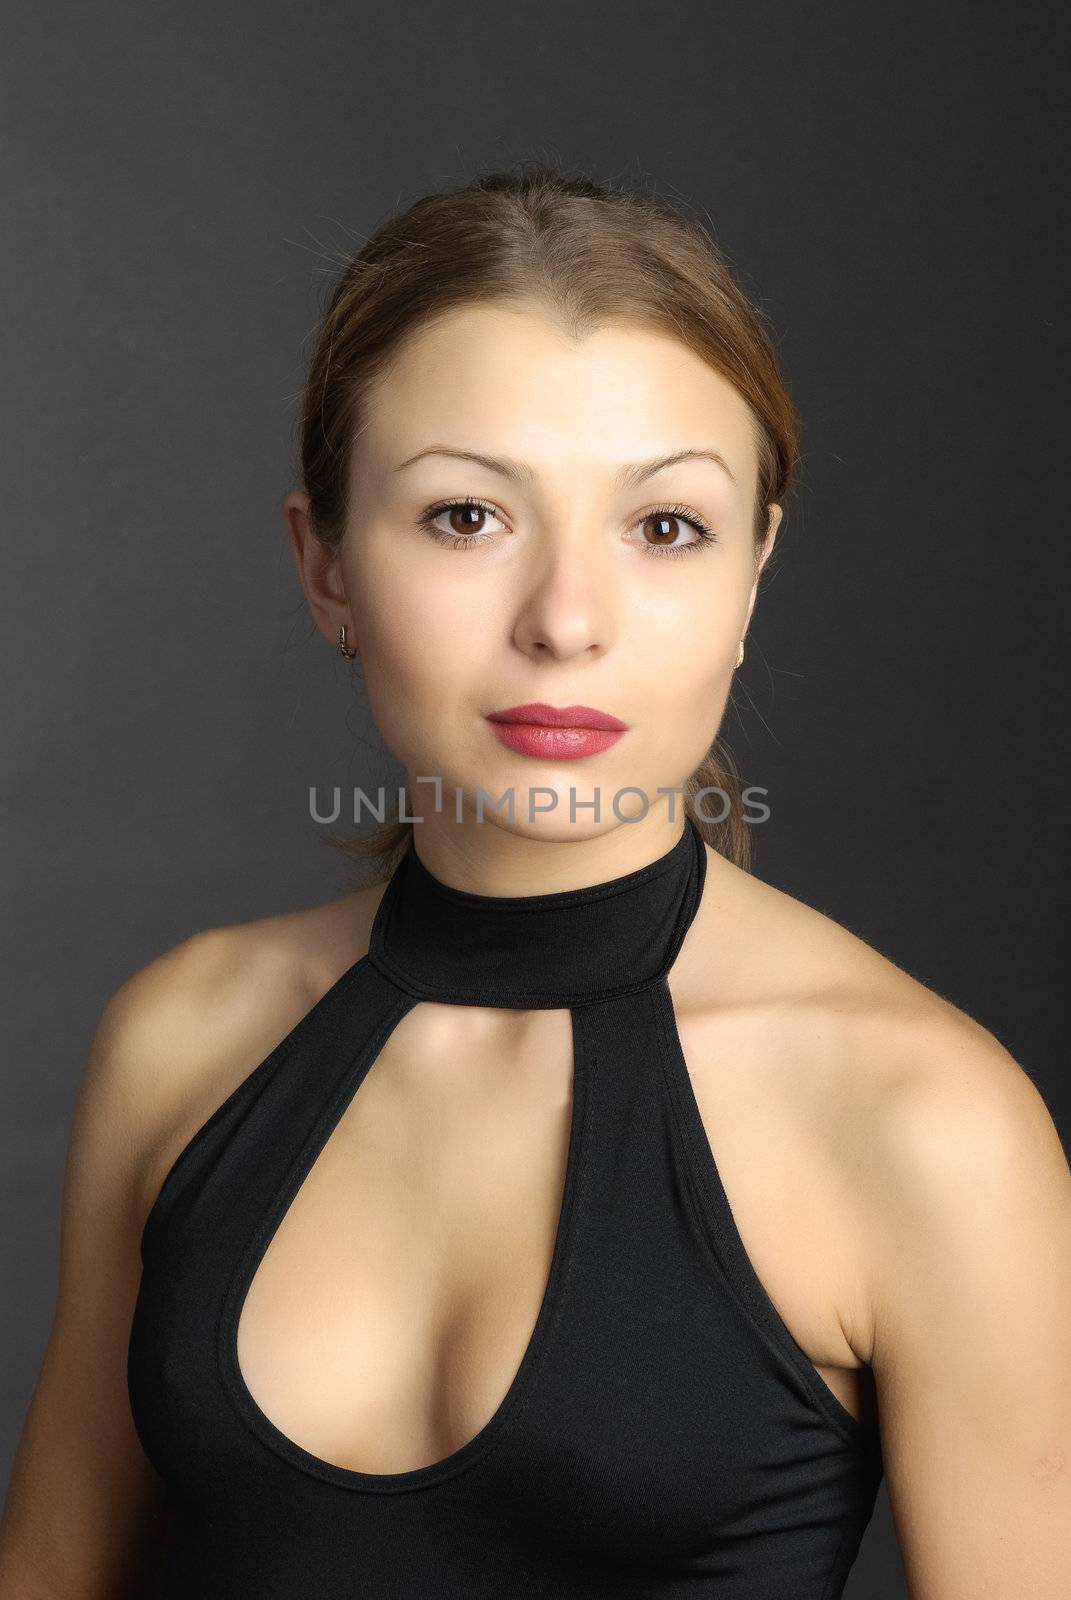 Smiling woman posing on a black background.